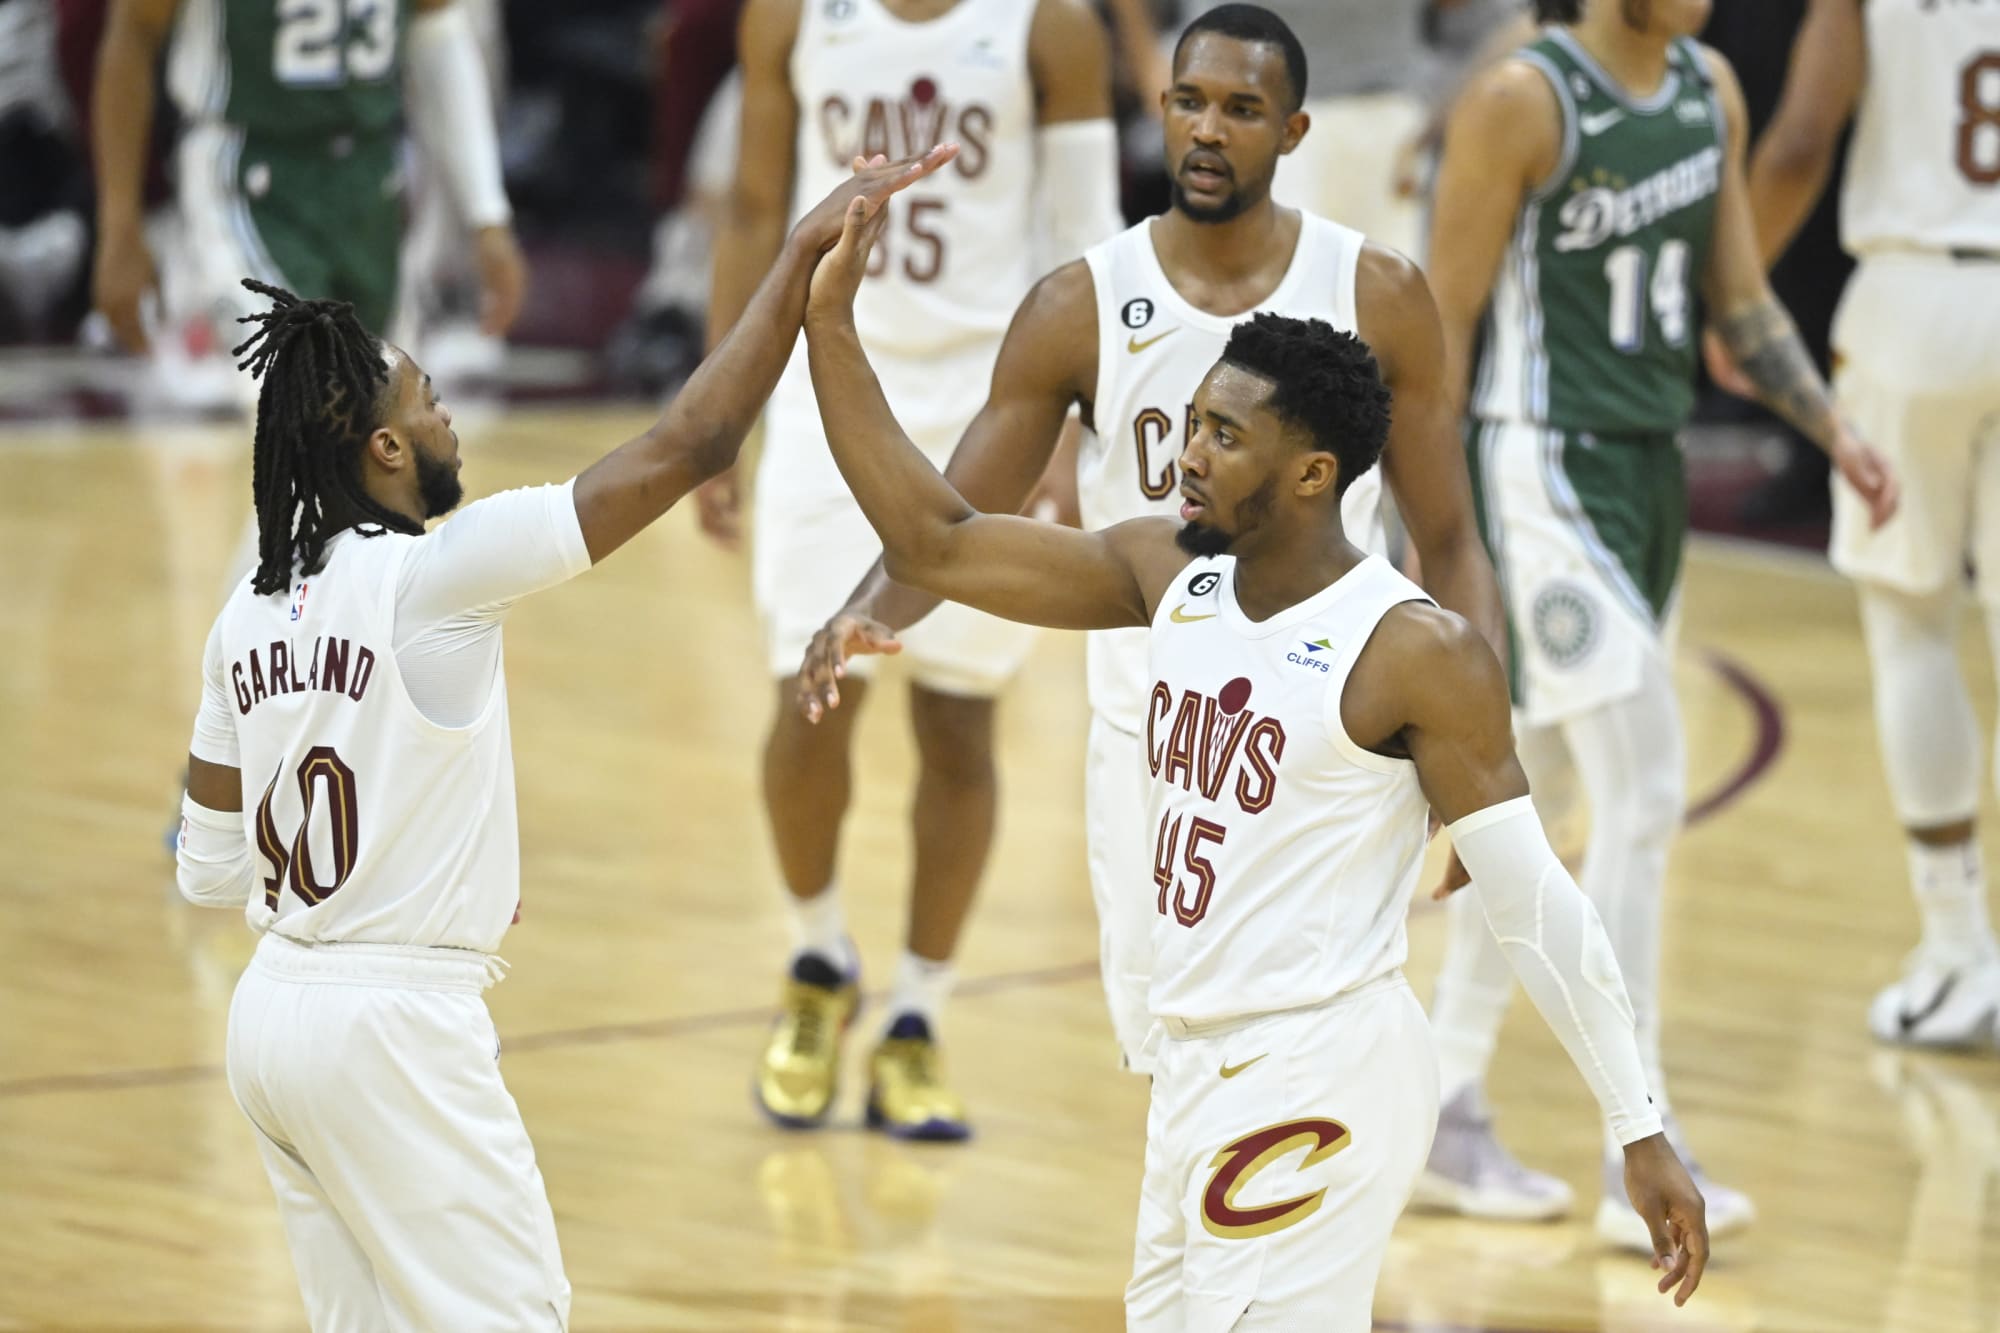 The 2007 Cleveland Cavaliers squad is better than they're given